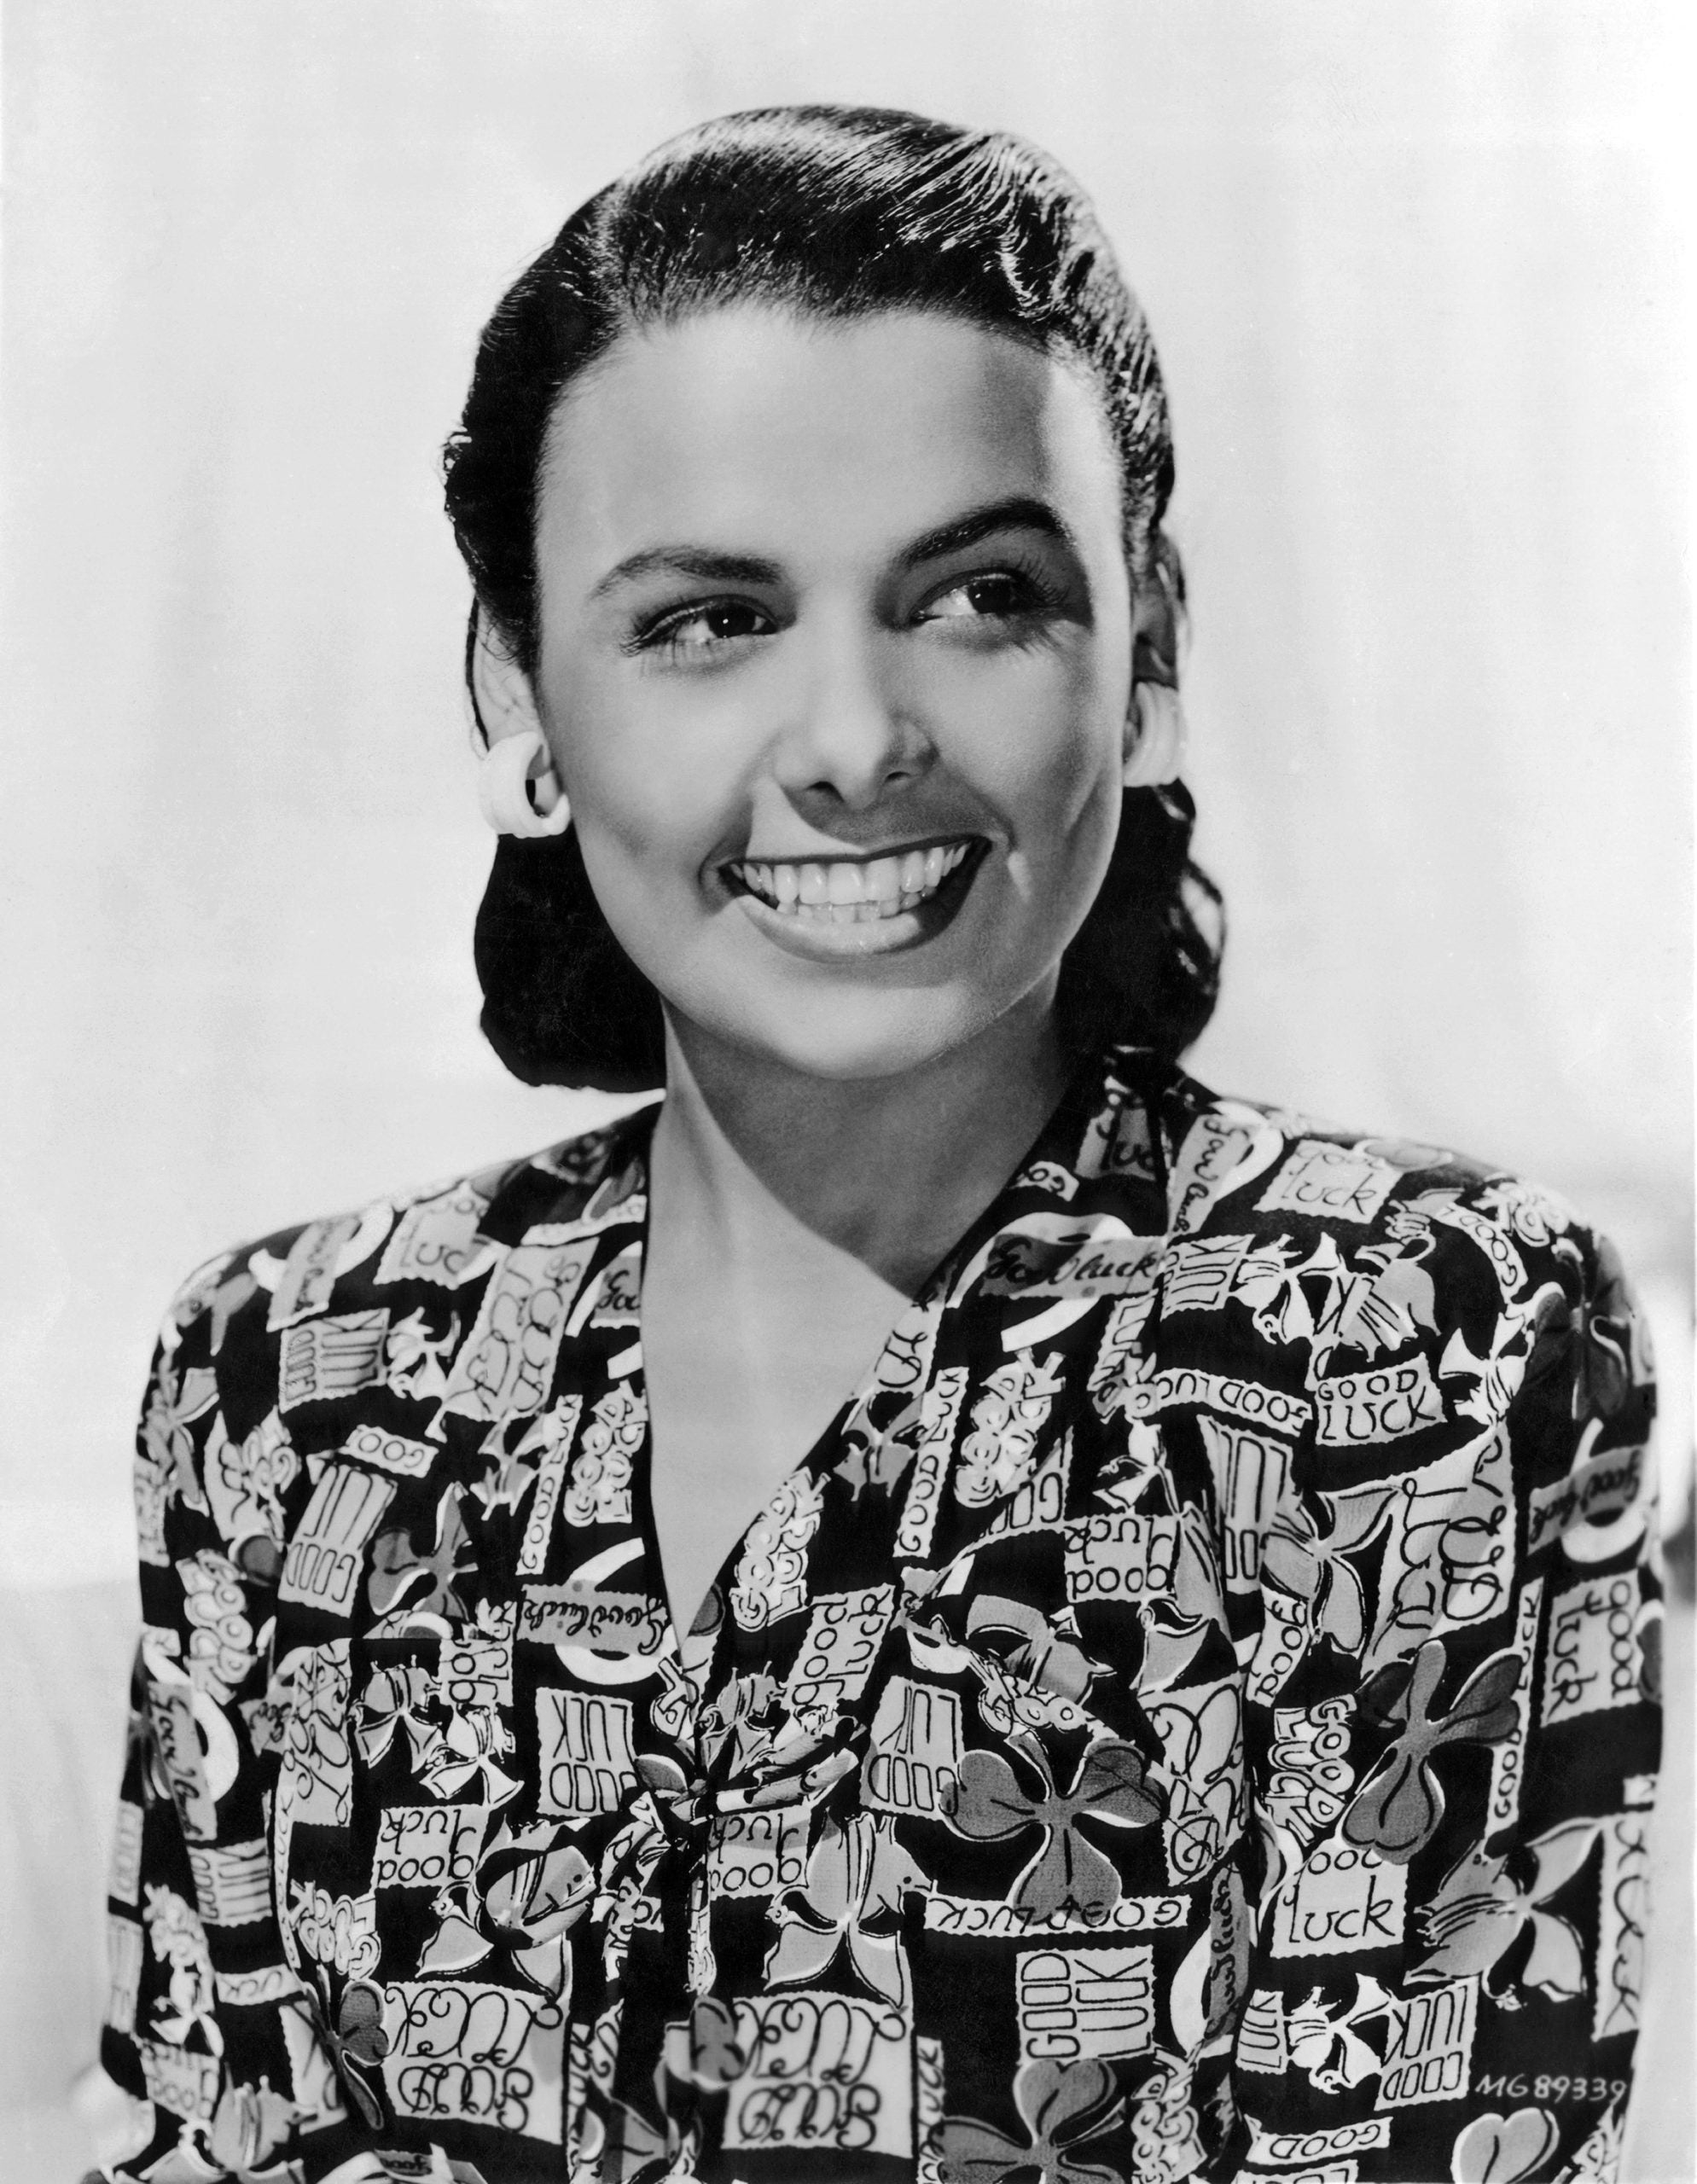 Broadway Theater To Be Renamed In Honor Of Lena Horne